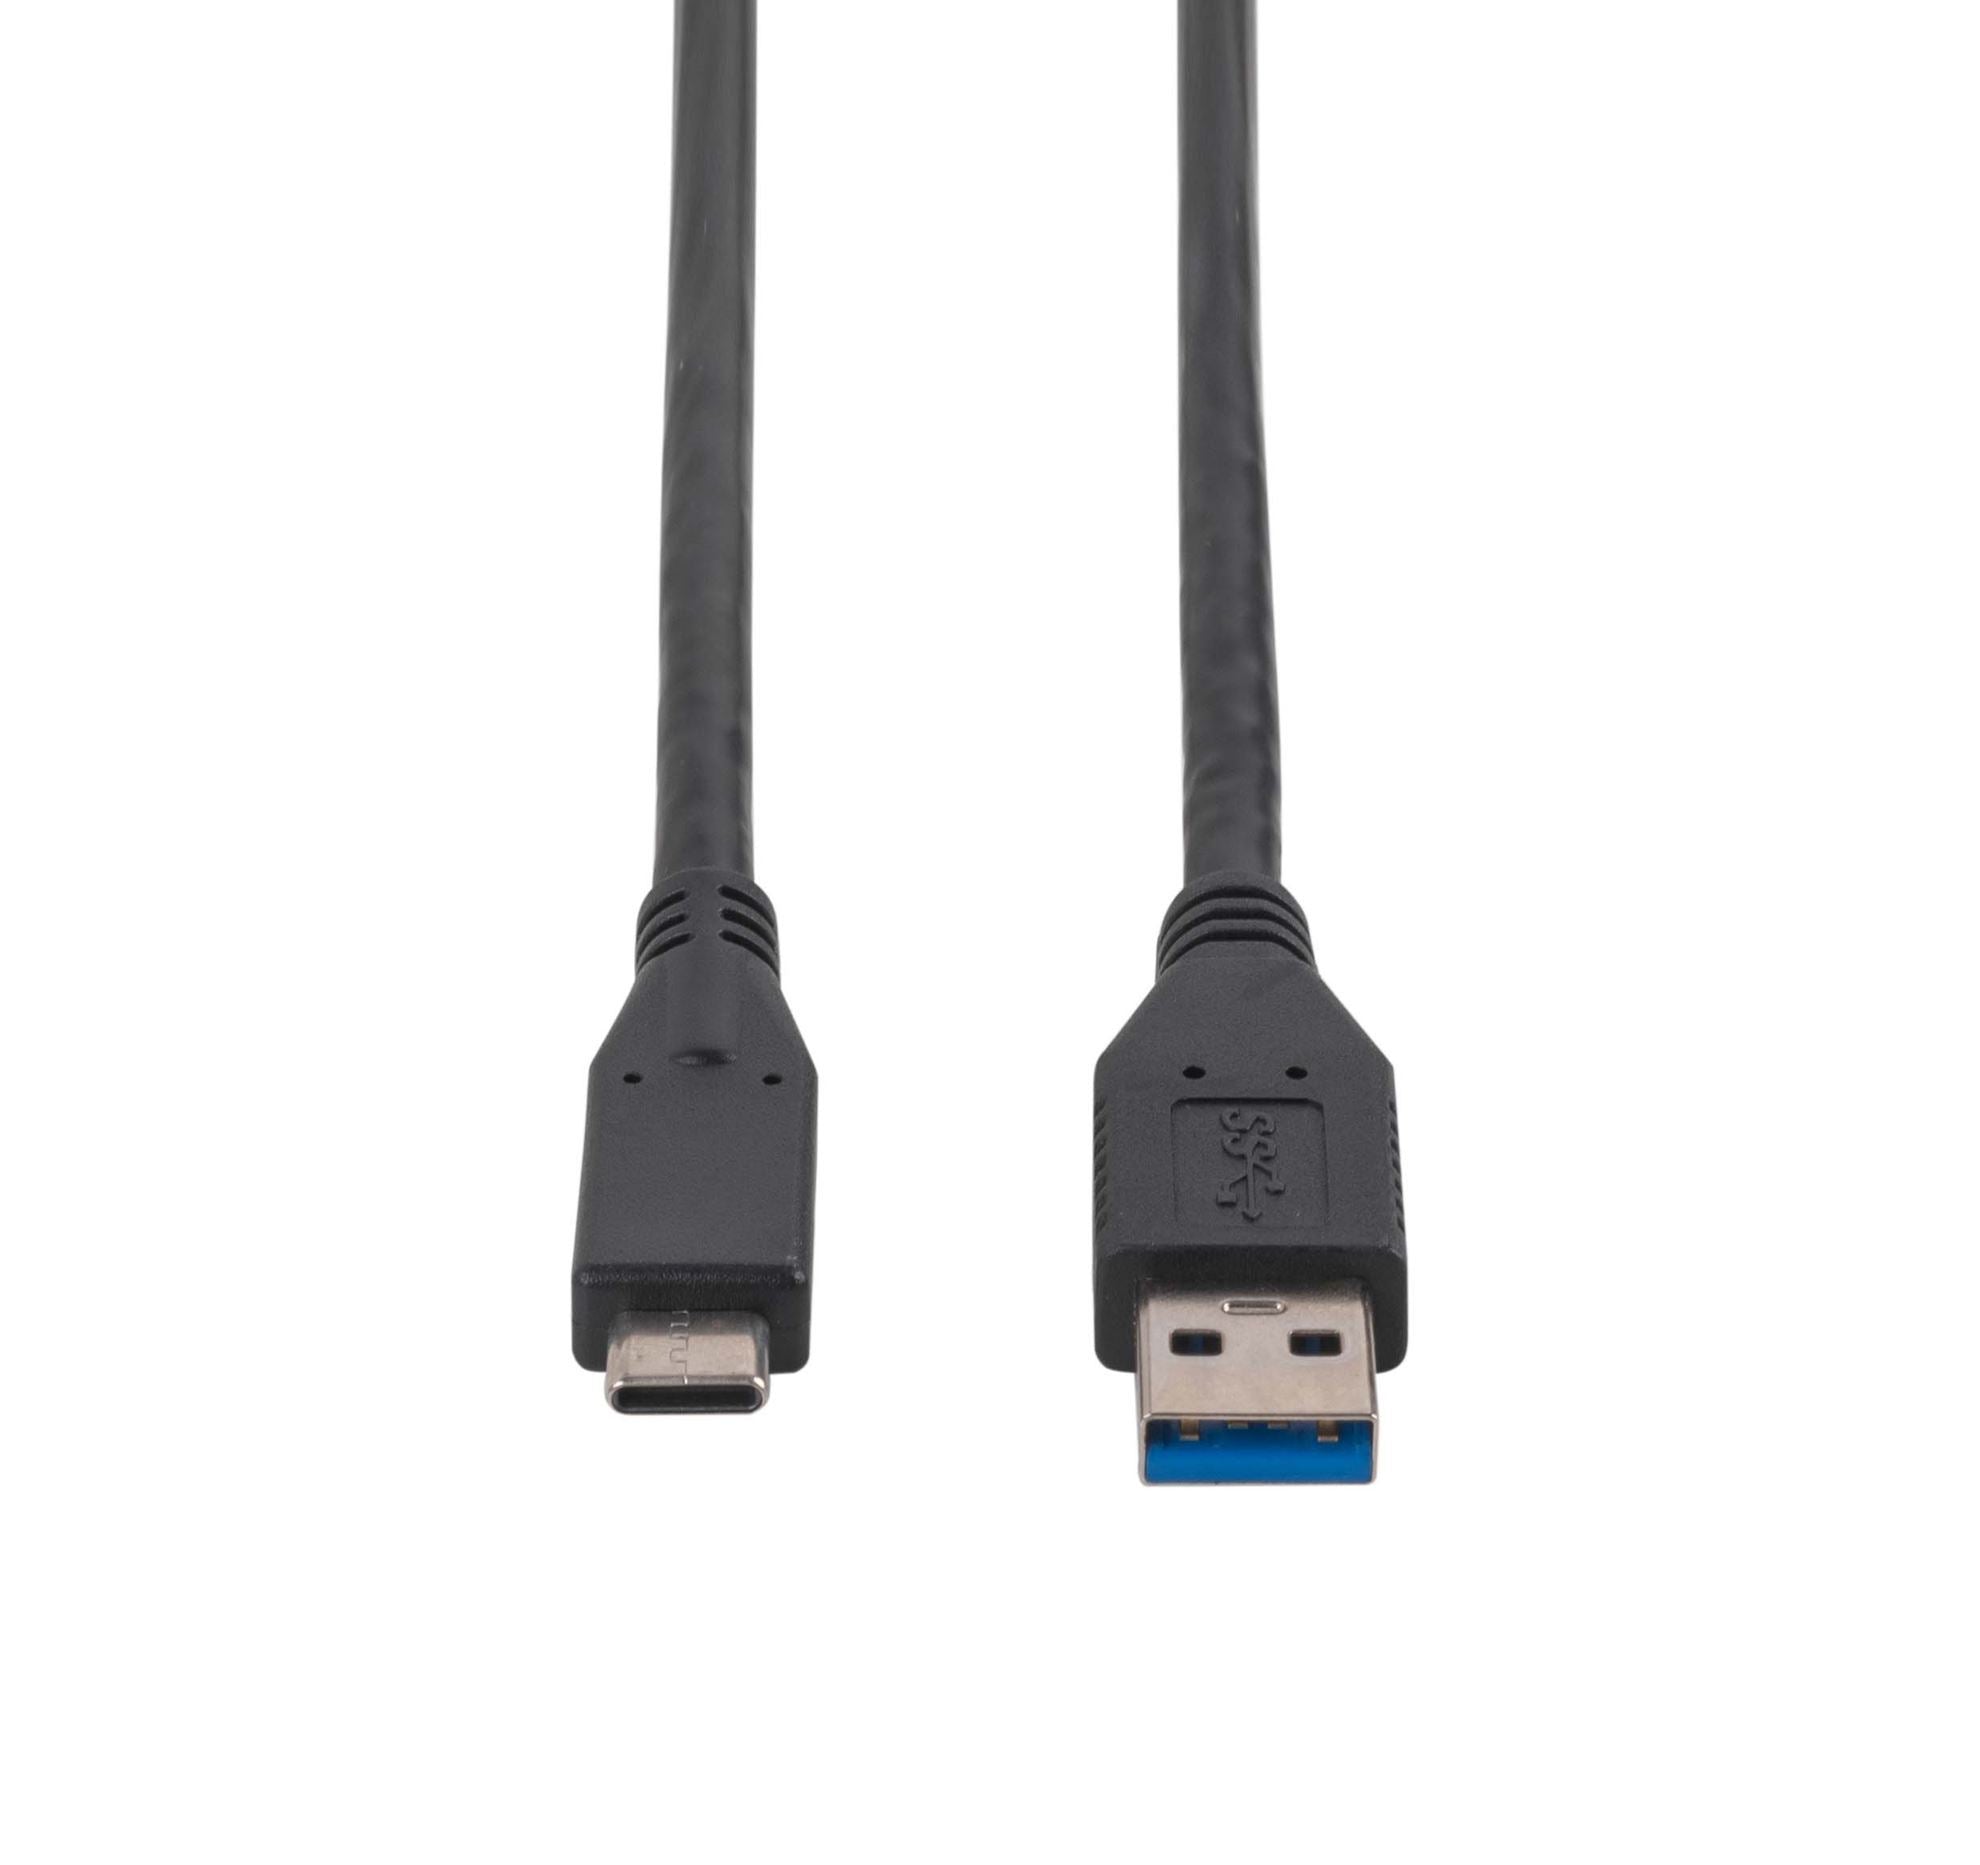 DYNAMIX_2M,_USB_3.1_USB-C_Male_to_USB-A_Male_Cable._Black_Colour._Up_to_10G_Data_Transfer_Speed,_Supports_3A_Current. 1139